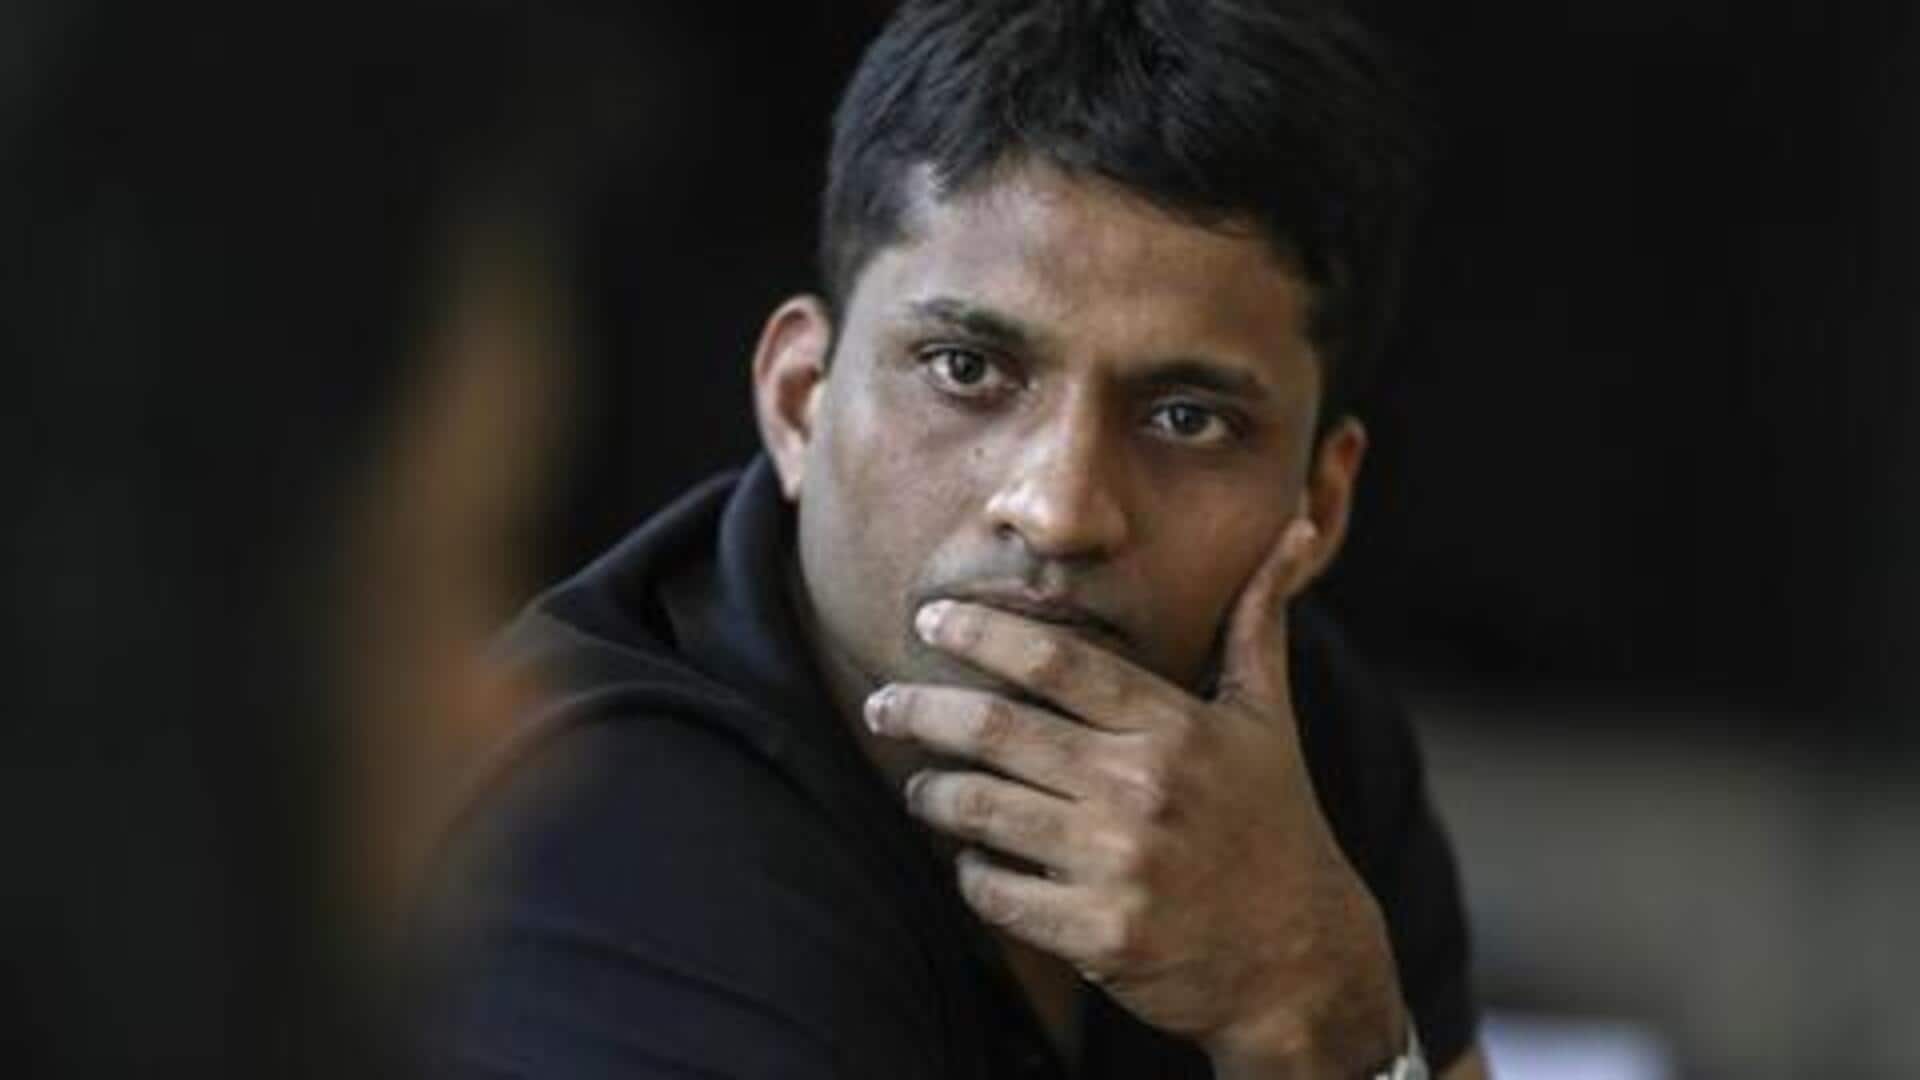 From billionaire to zero: Byju Raveendran's net worth wiped out